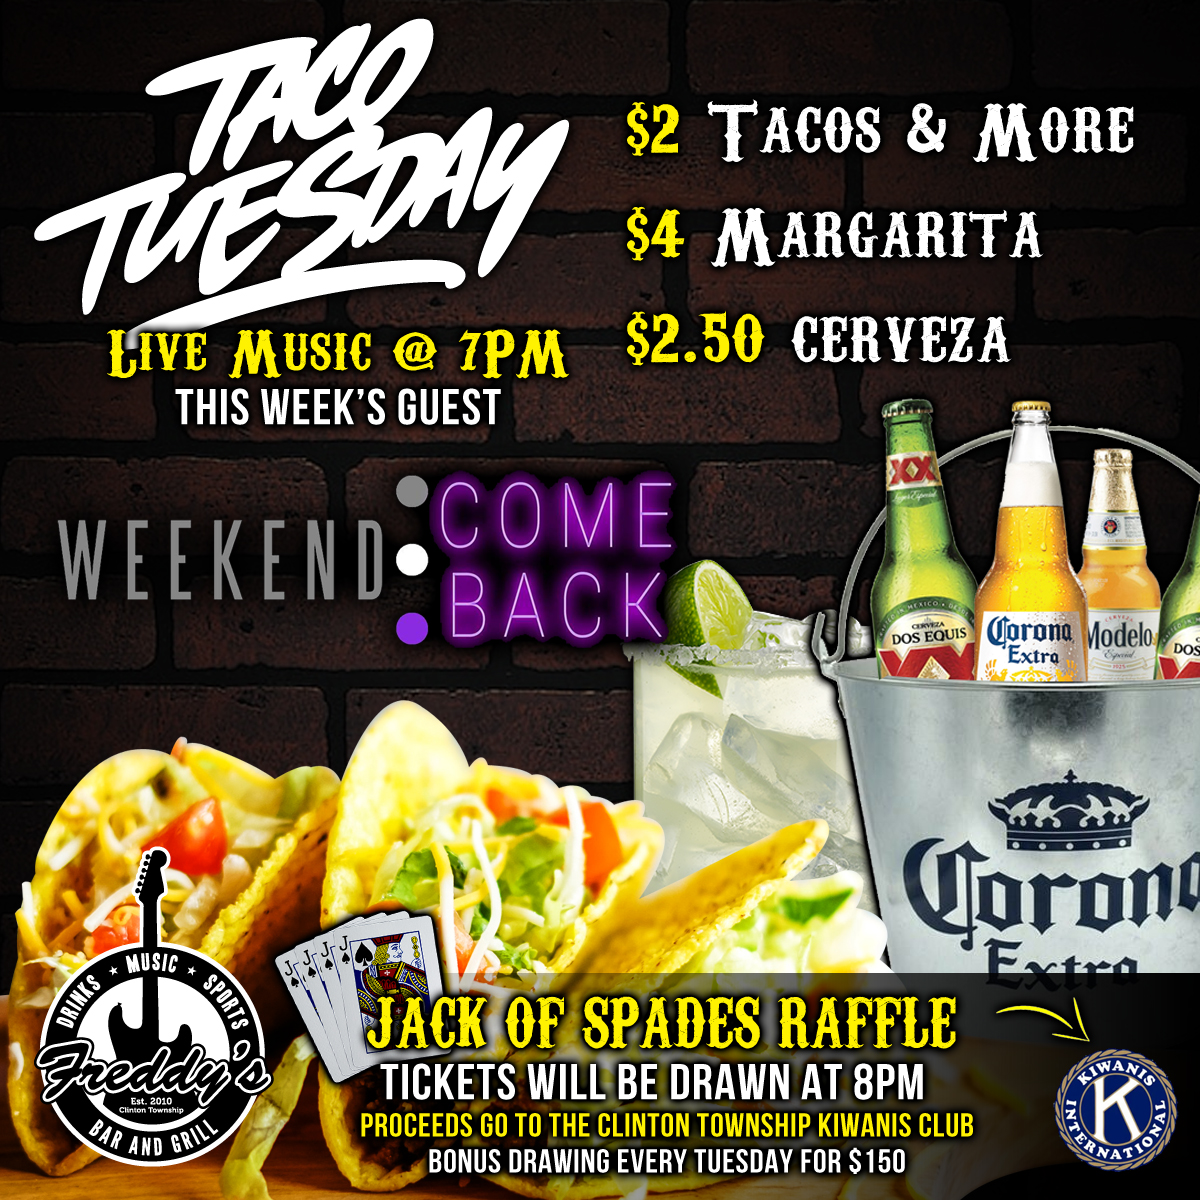 7/18 Taco Tuesday with Weekend Comeback